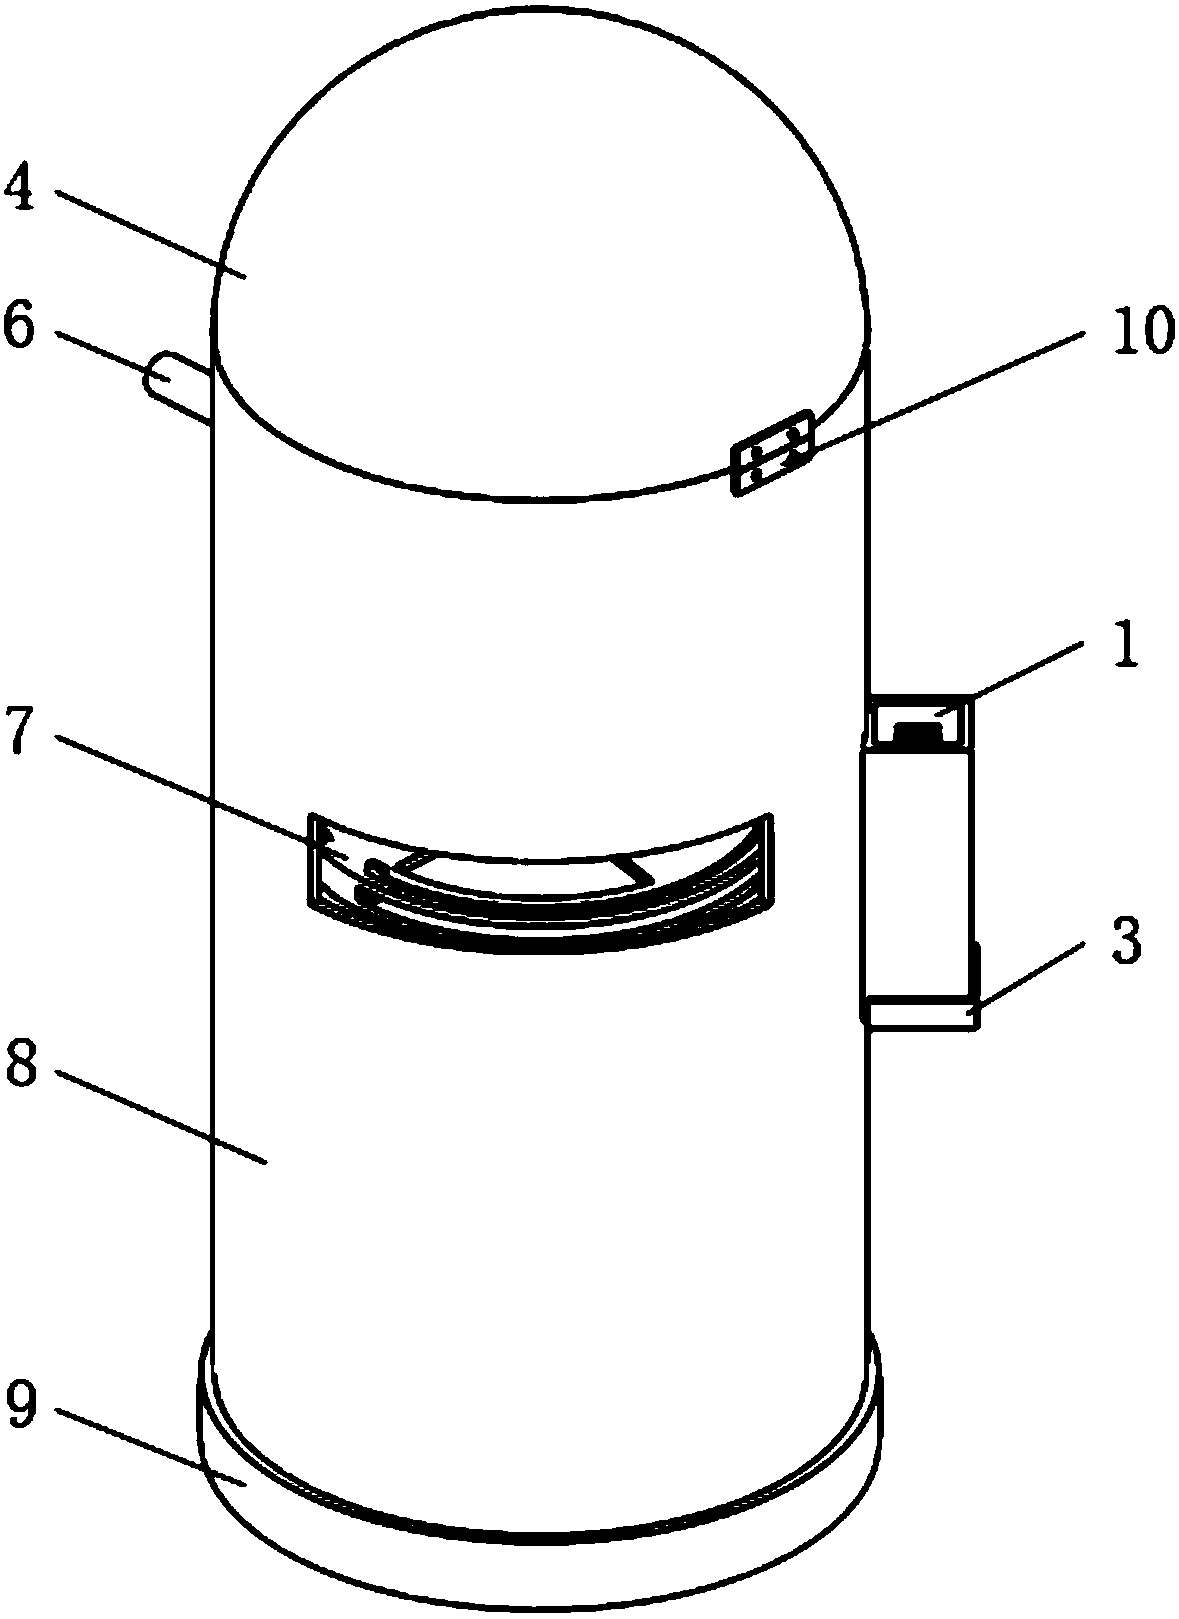 Ward garbage can with compression function